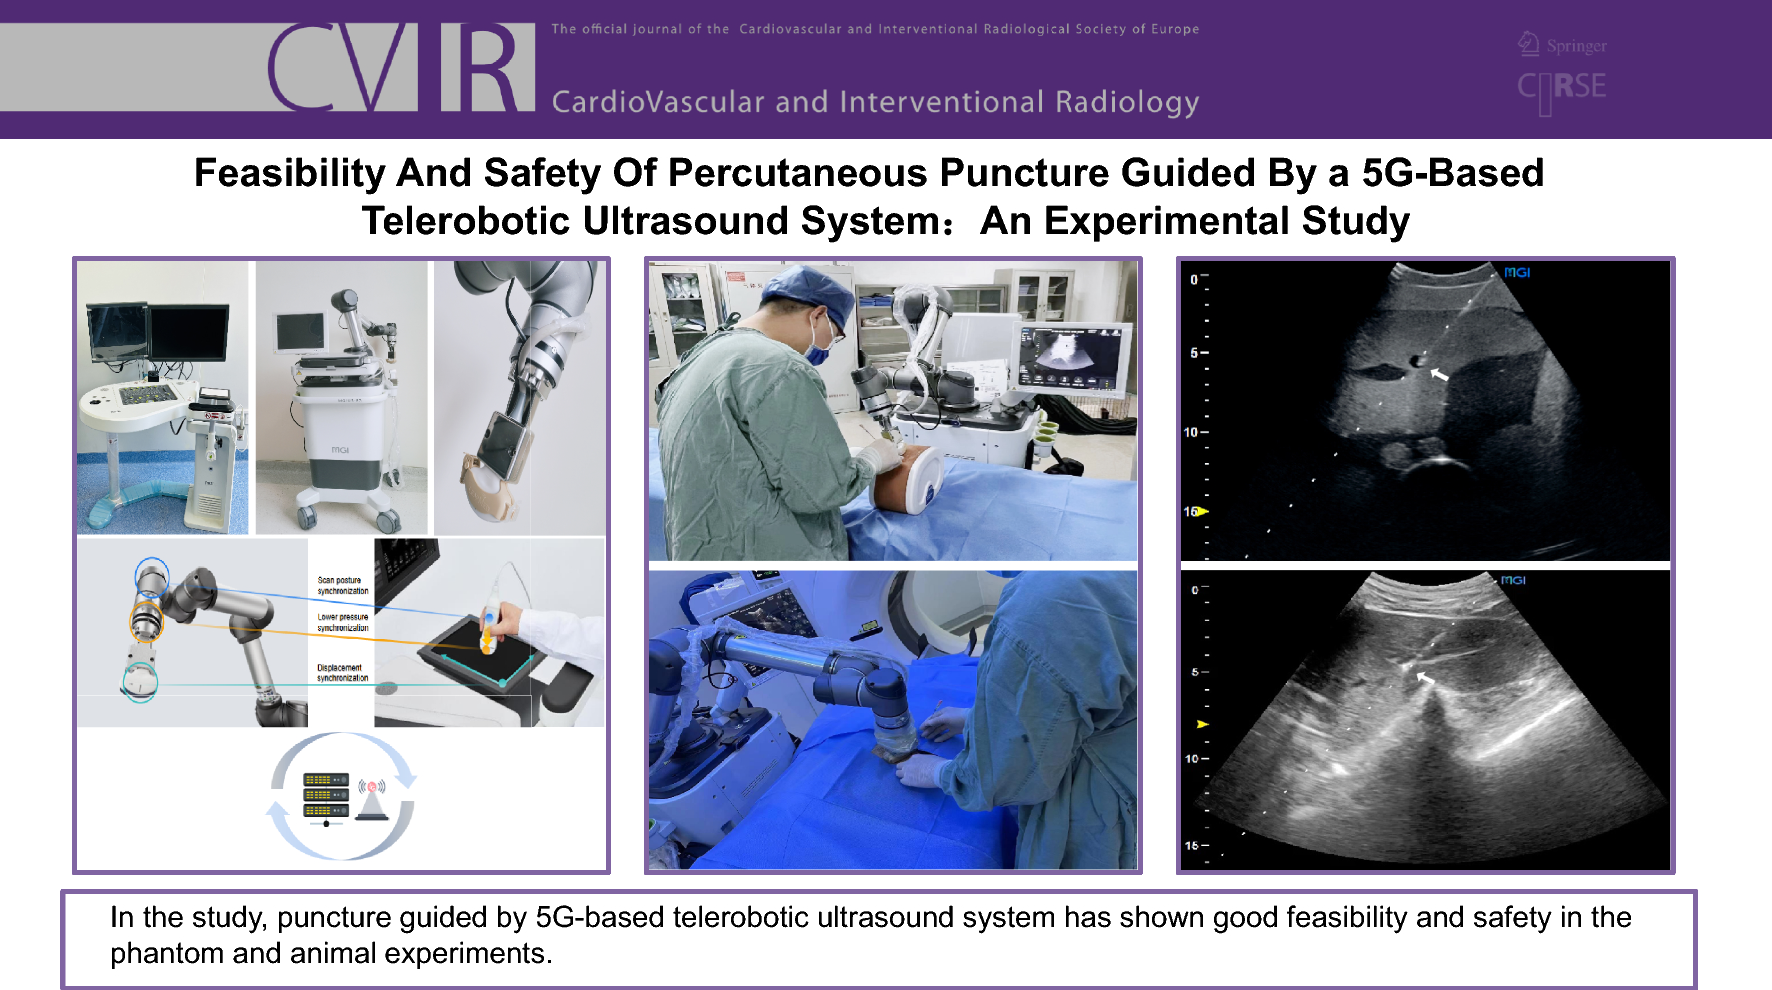 Feasibility and Safety of Percutaneous Puncture Guided by a 5G-Based Telerobotic Ultrasound System: An Experimental Study